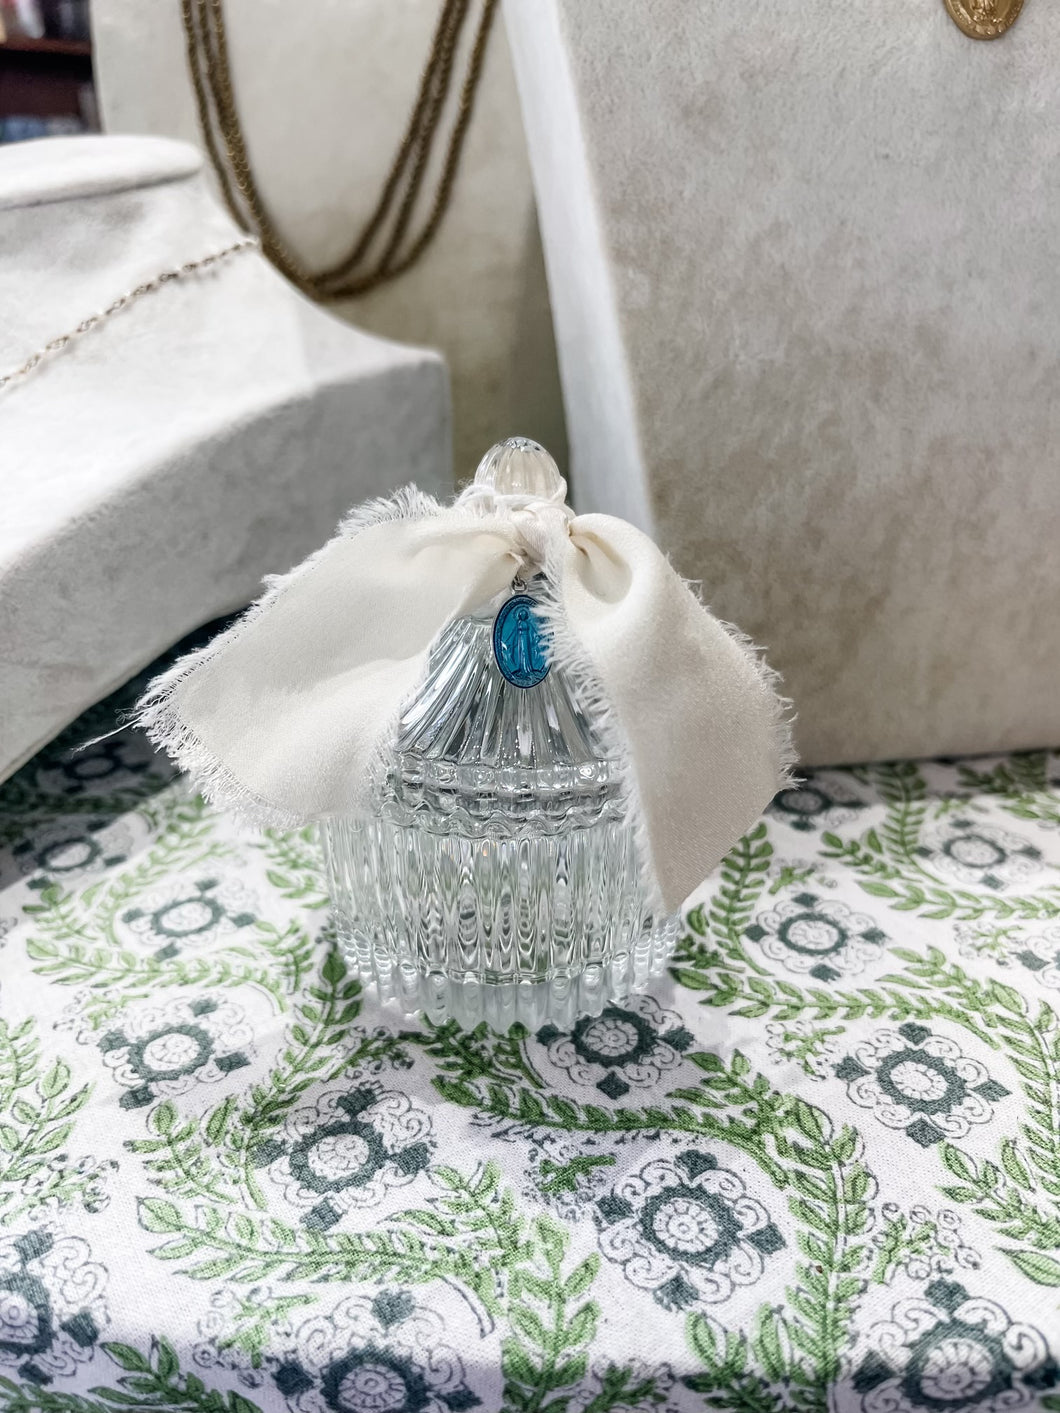 Small Crystal Lidded Dish Light Blue Mary with Cream Ribbon-The Gilded Mosquito by Lisa Leger